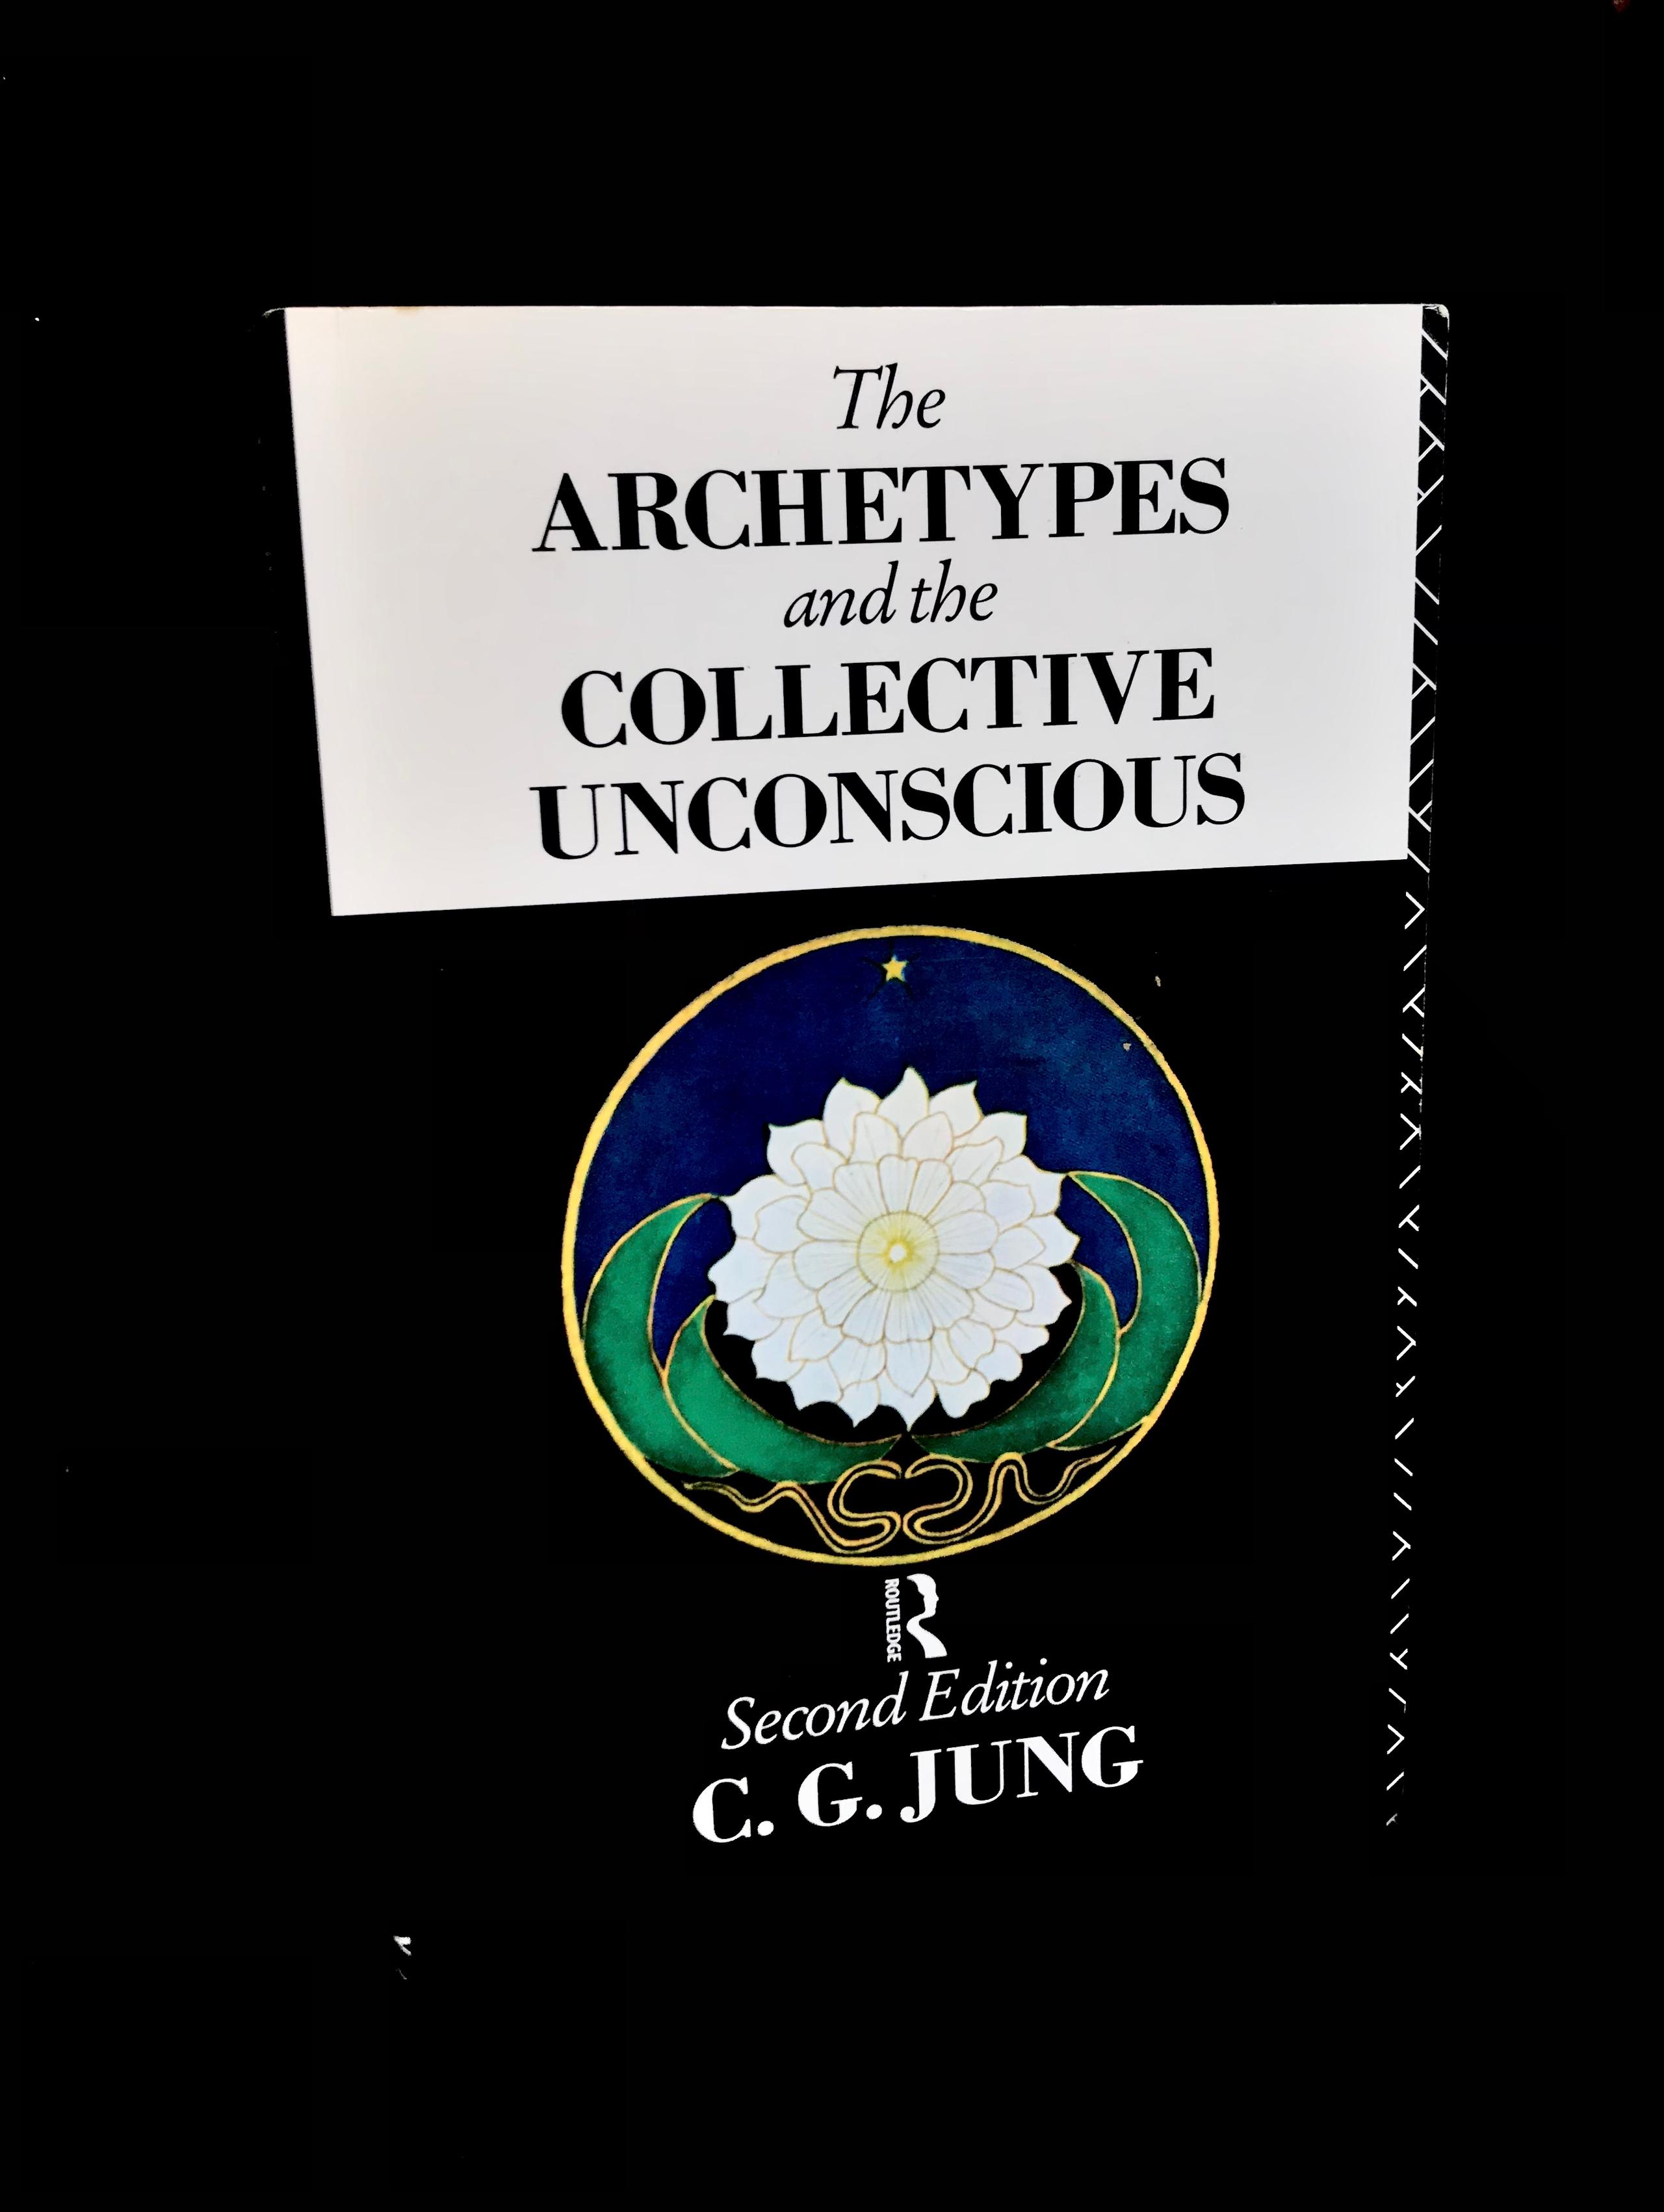 The Archetypes and the Collective Unconscious by C. G. Jung